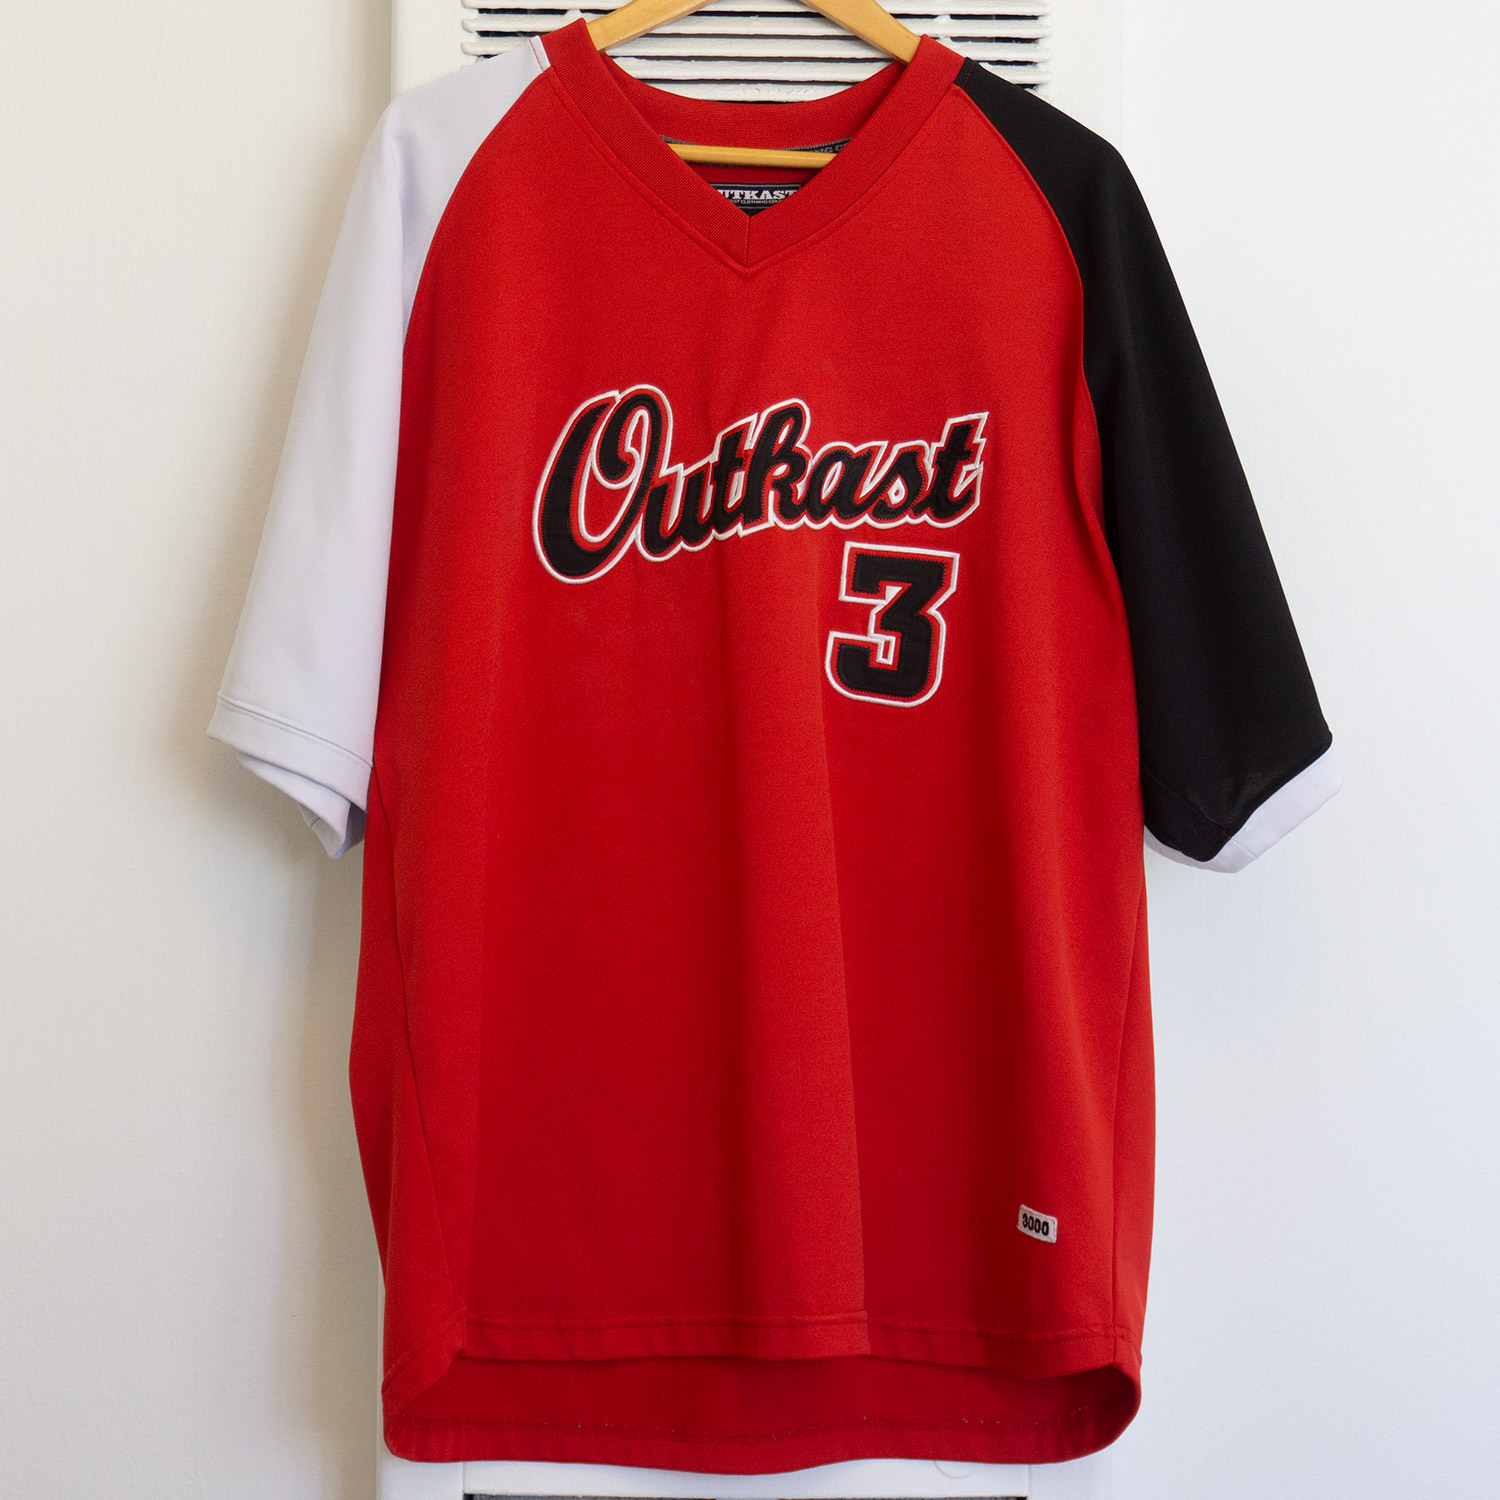 Outkast Clothing Co. Jersey T-shirt